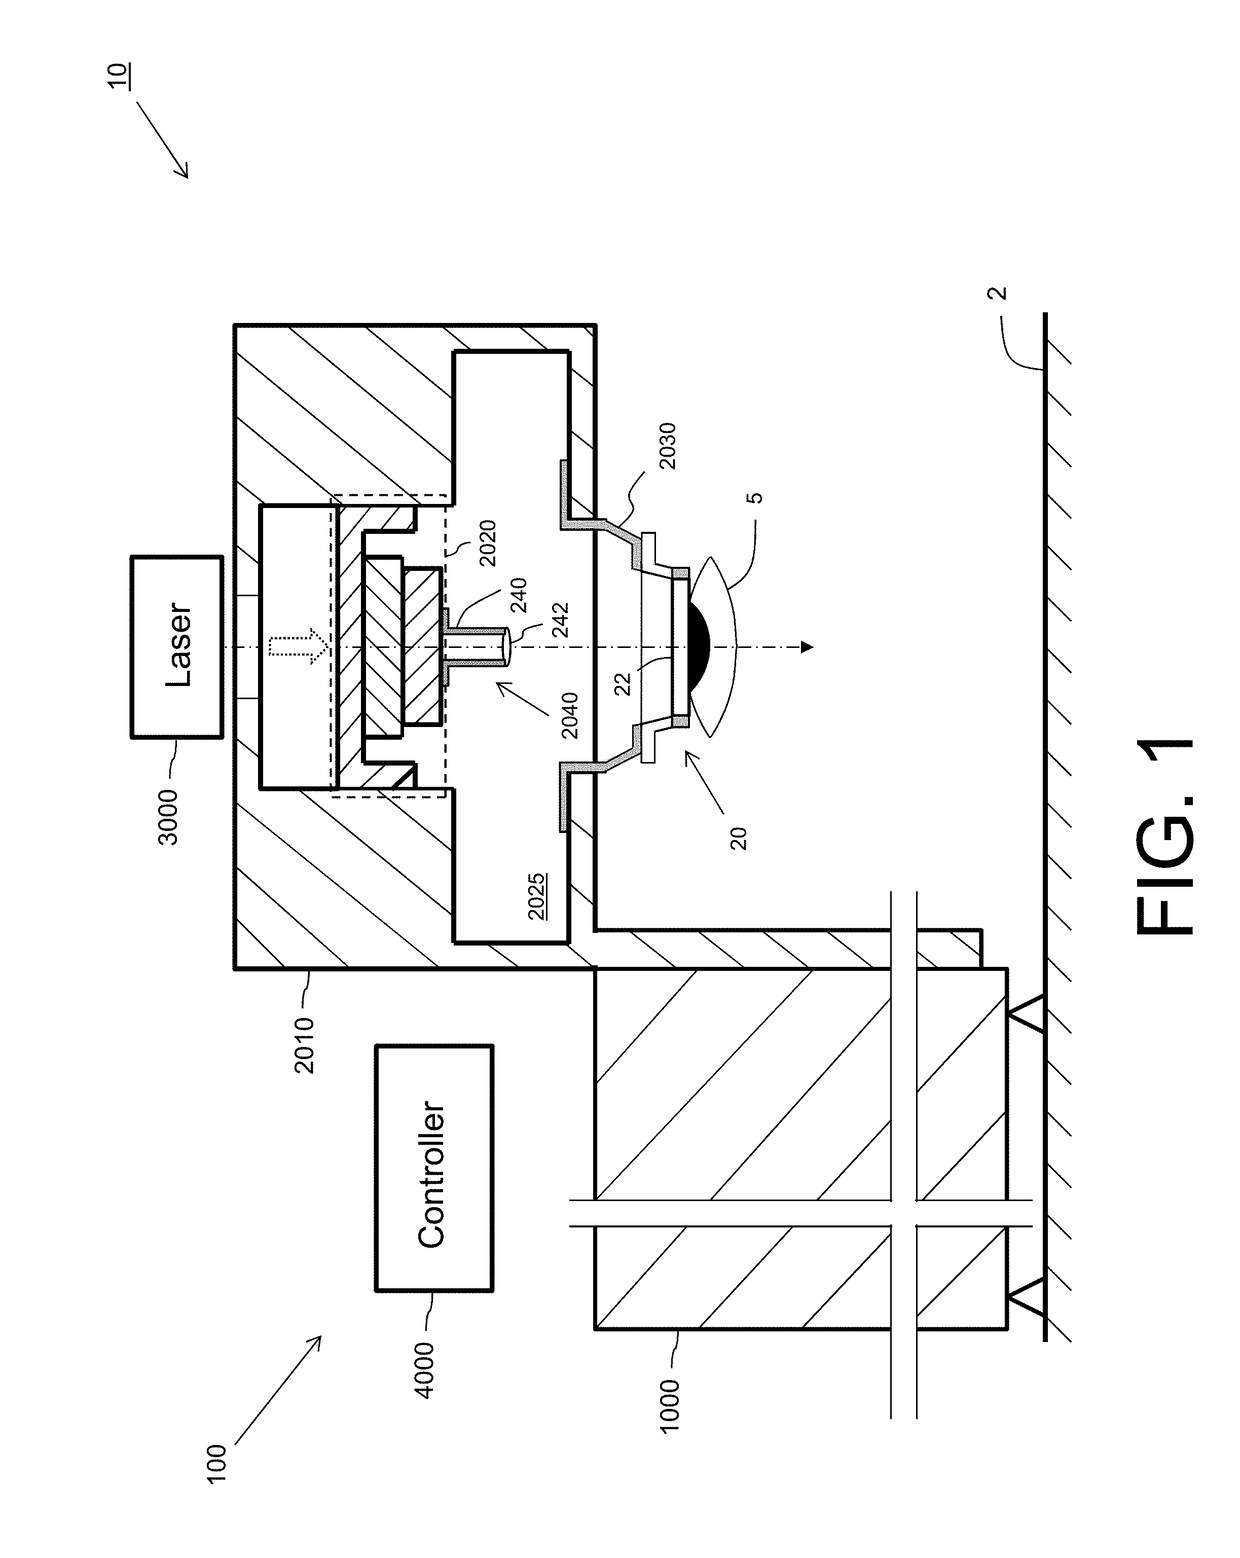 Patient interface device for laser eye surgery having light guiding structure for illuminating eye